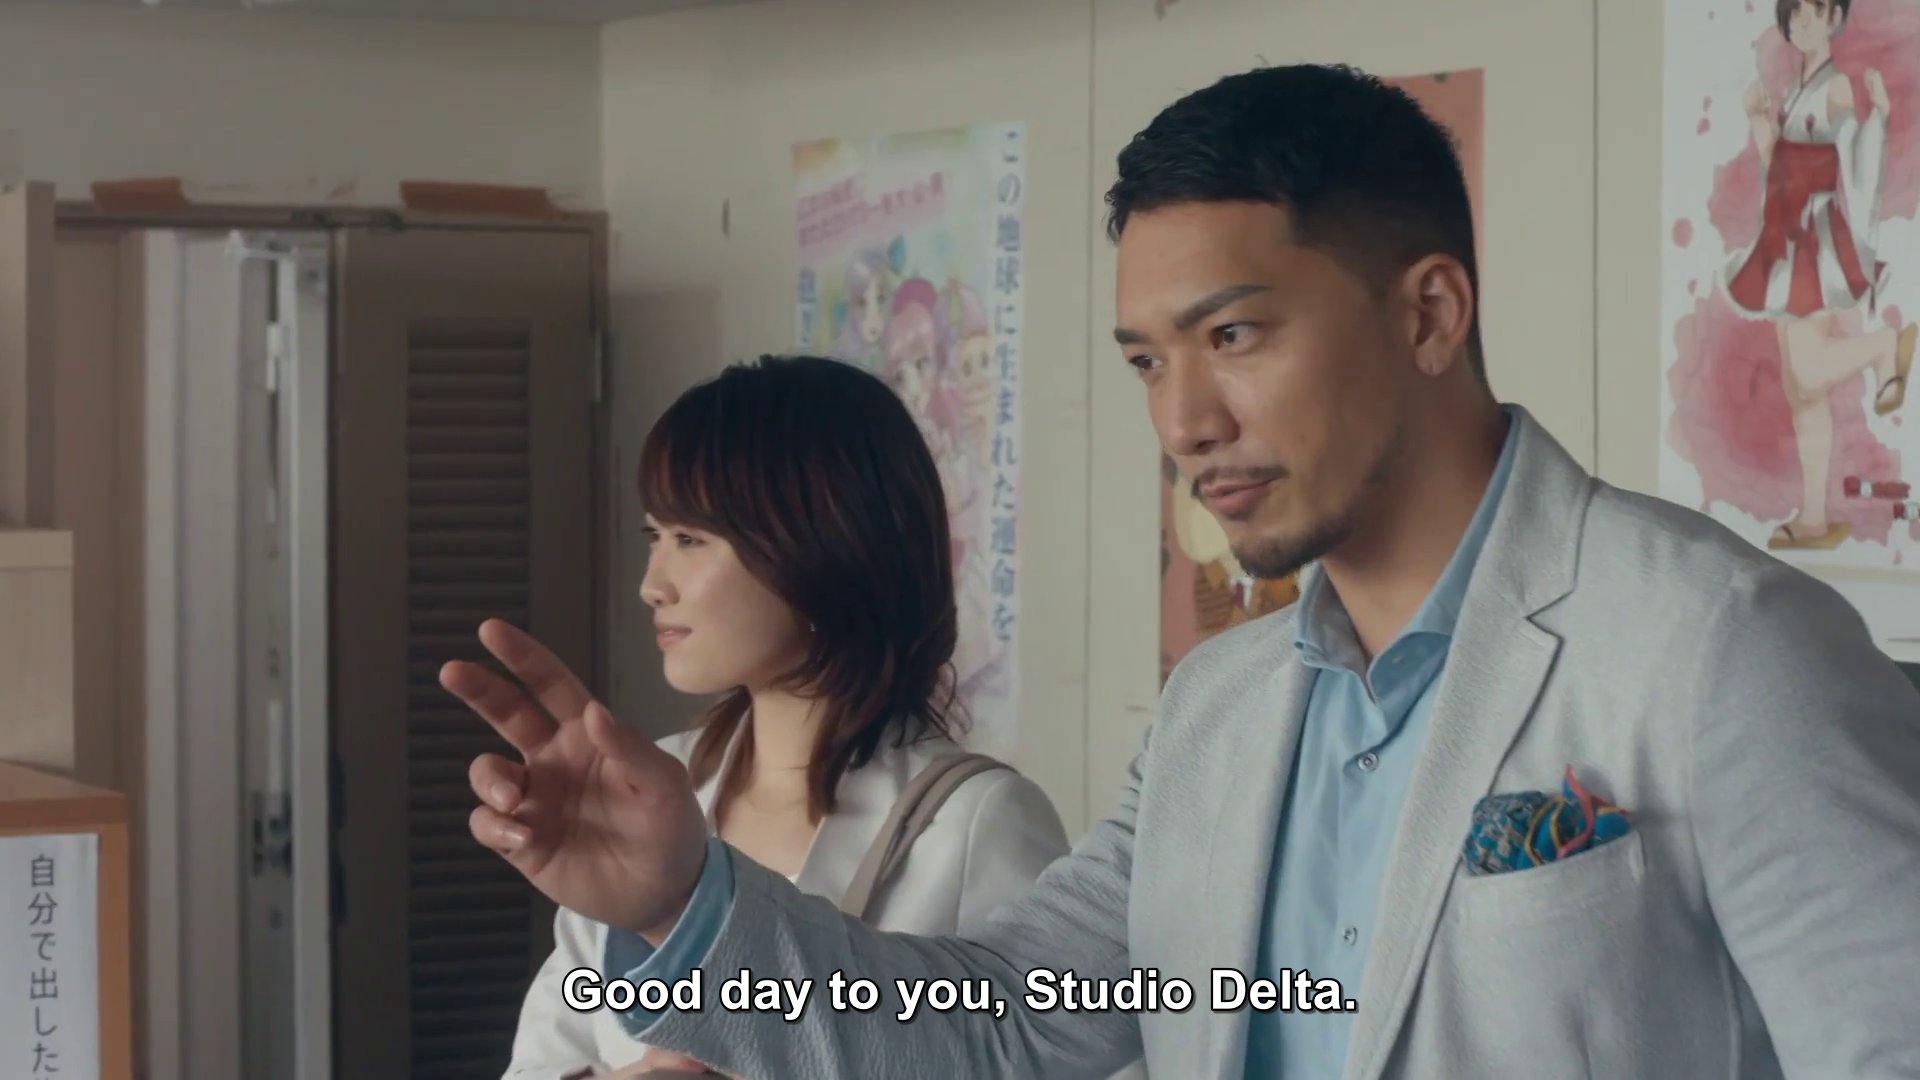 Shiraki, played by SWAY, a man with a light suit and goatee: Good day to you, Studio Delta